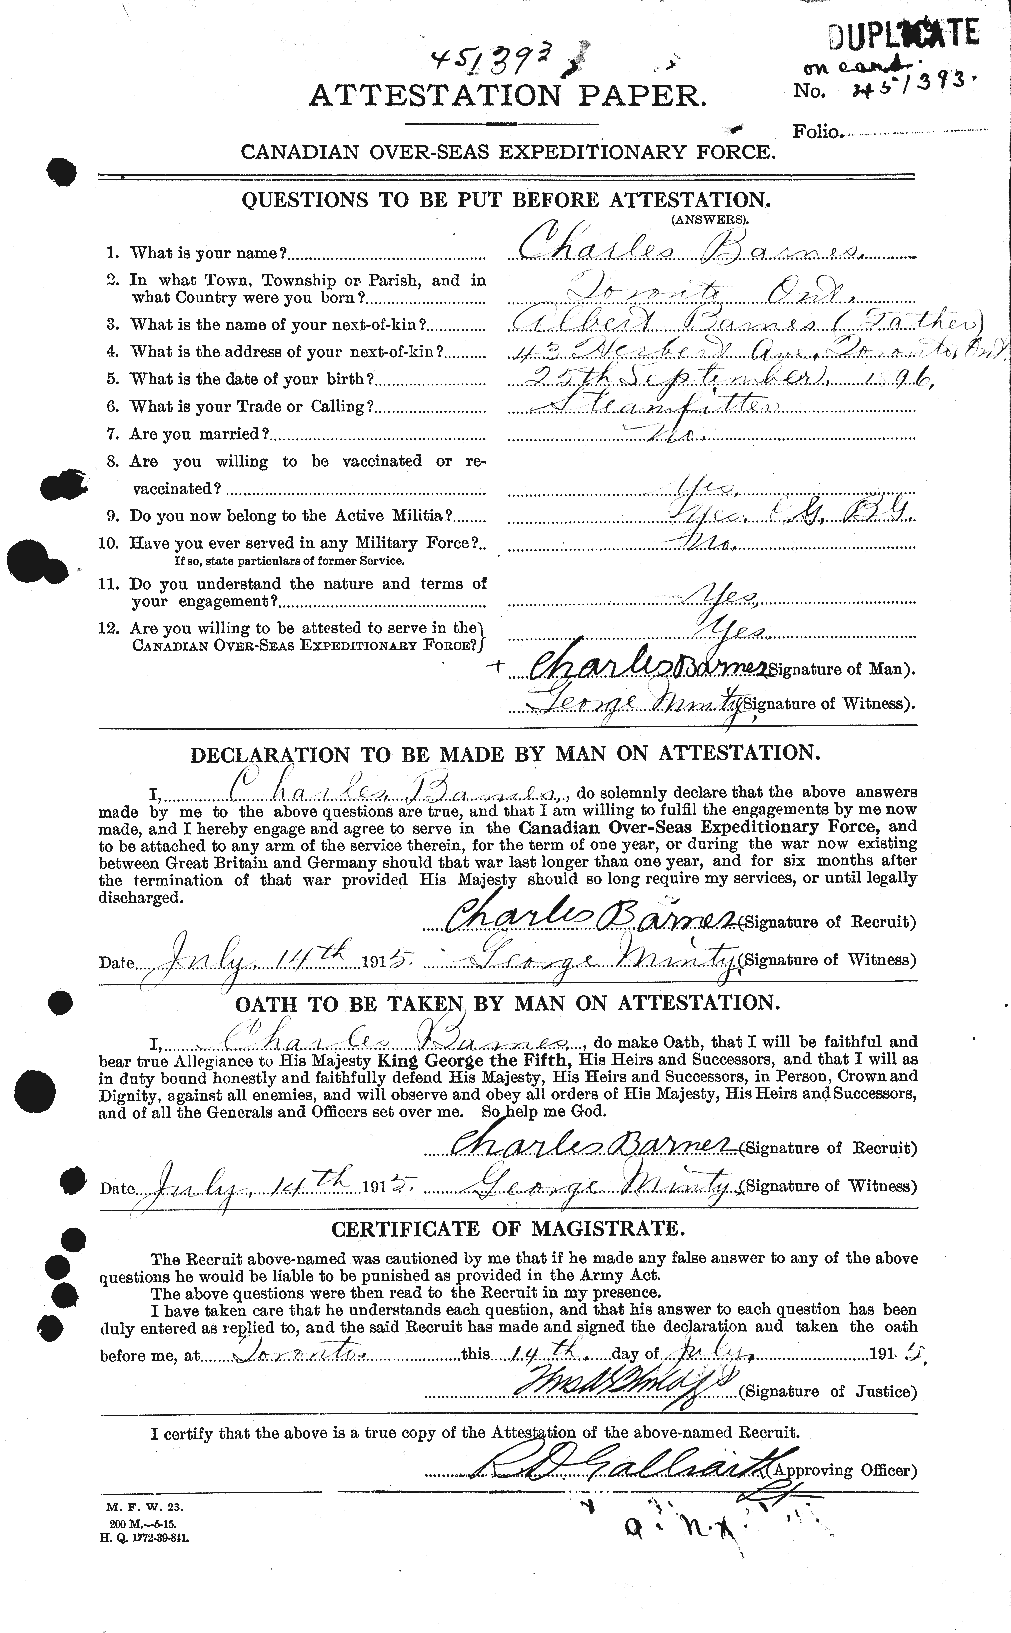 Personnel Records of the First World War - CEF 222630a